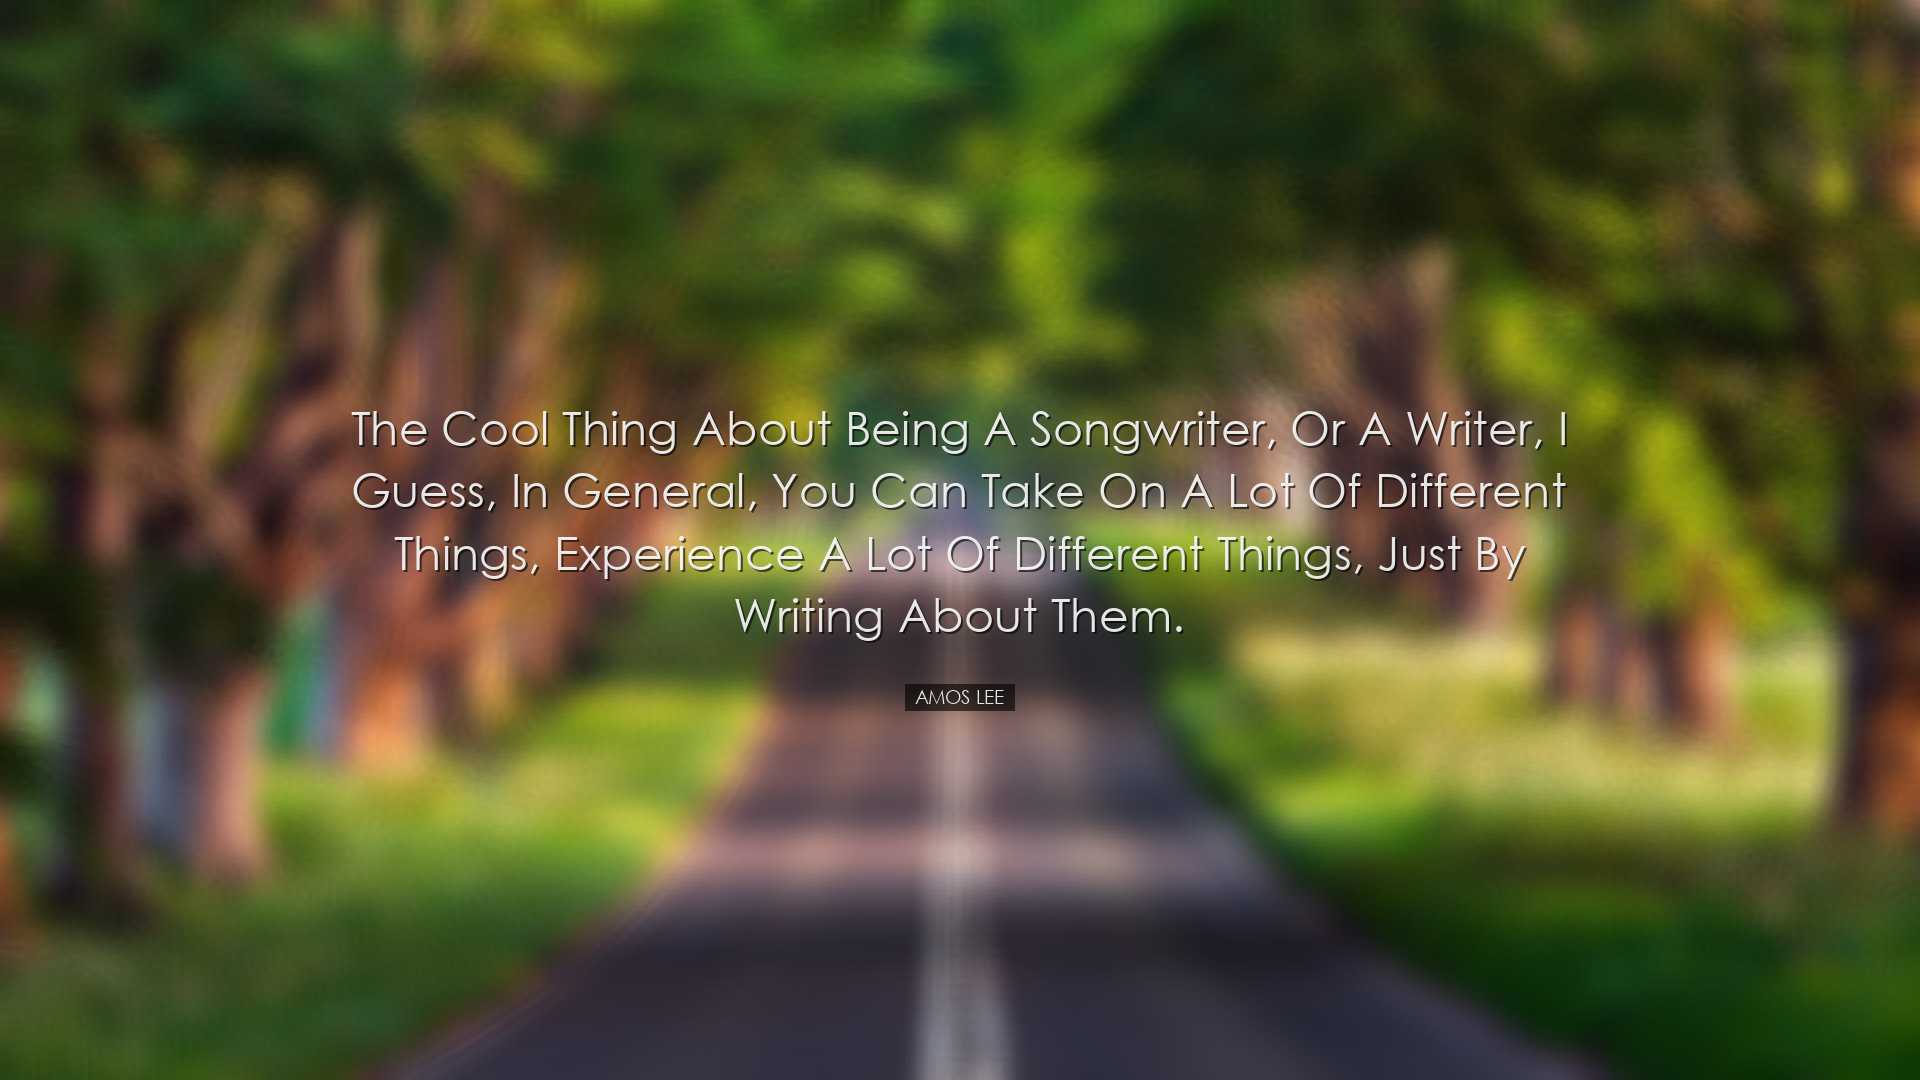 The cool thing about being a songwriter, or a writer, I guess, in